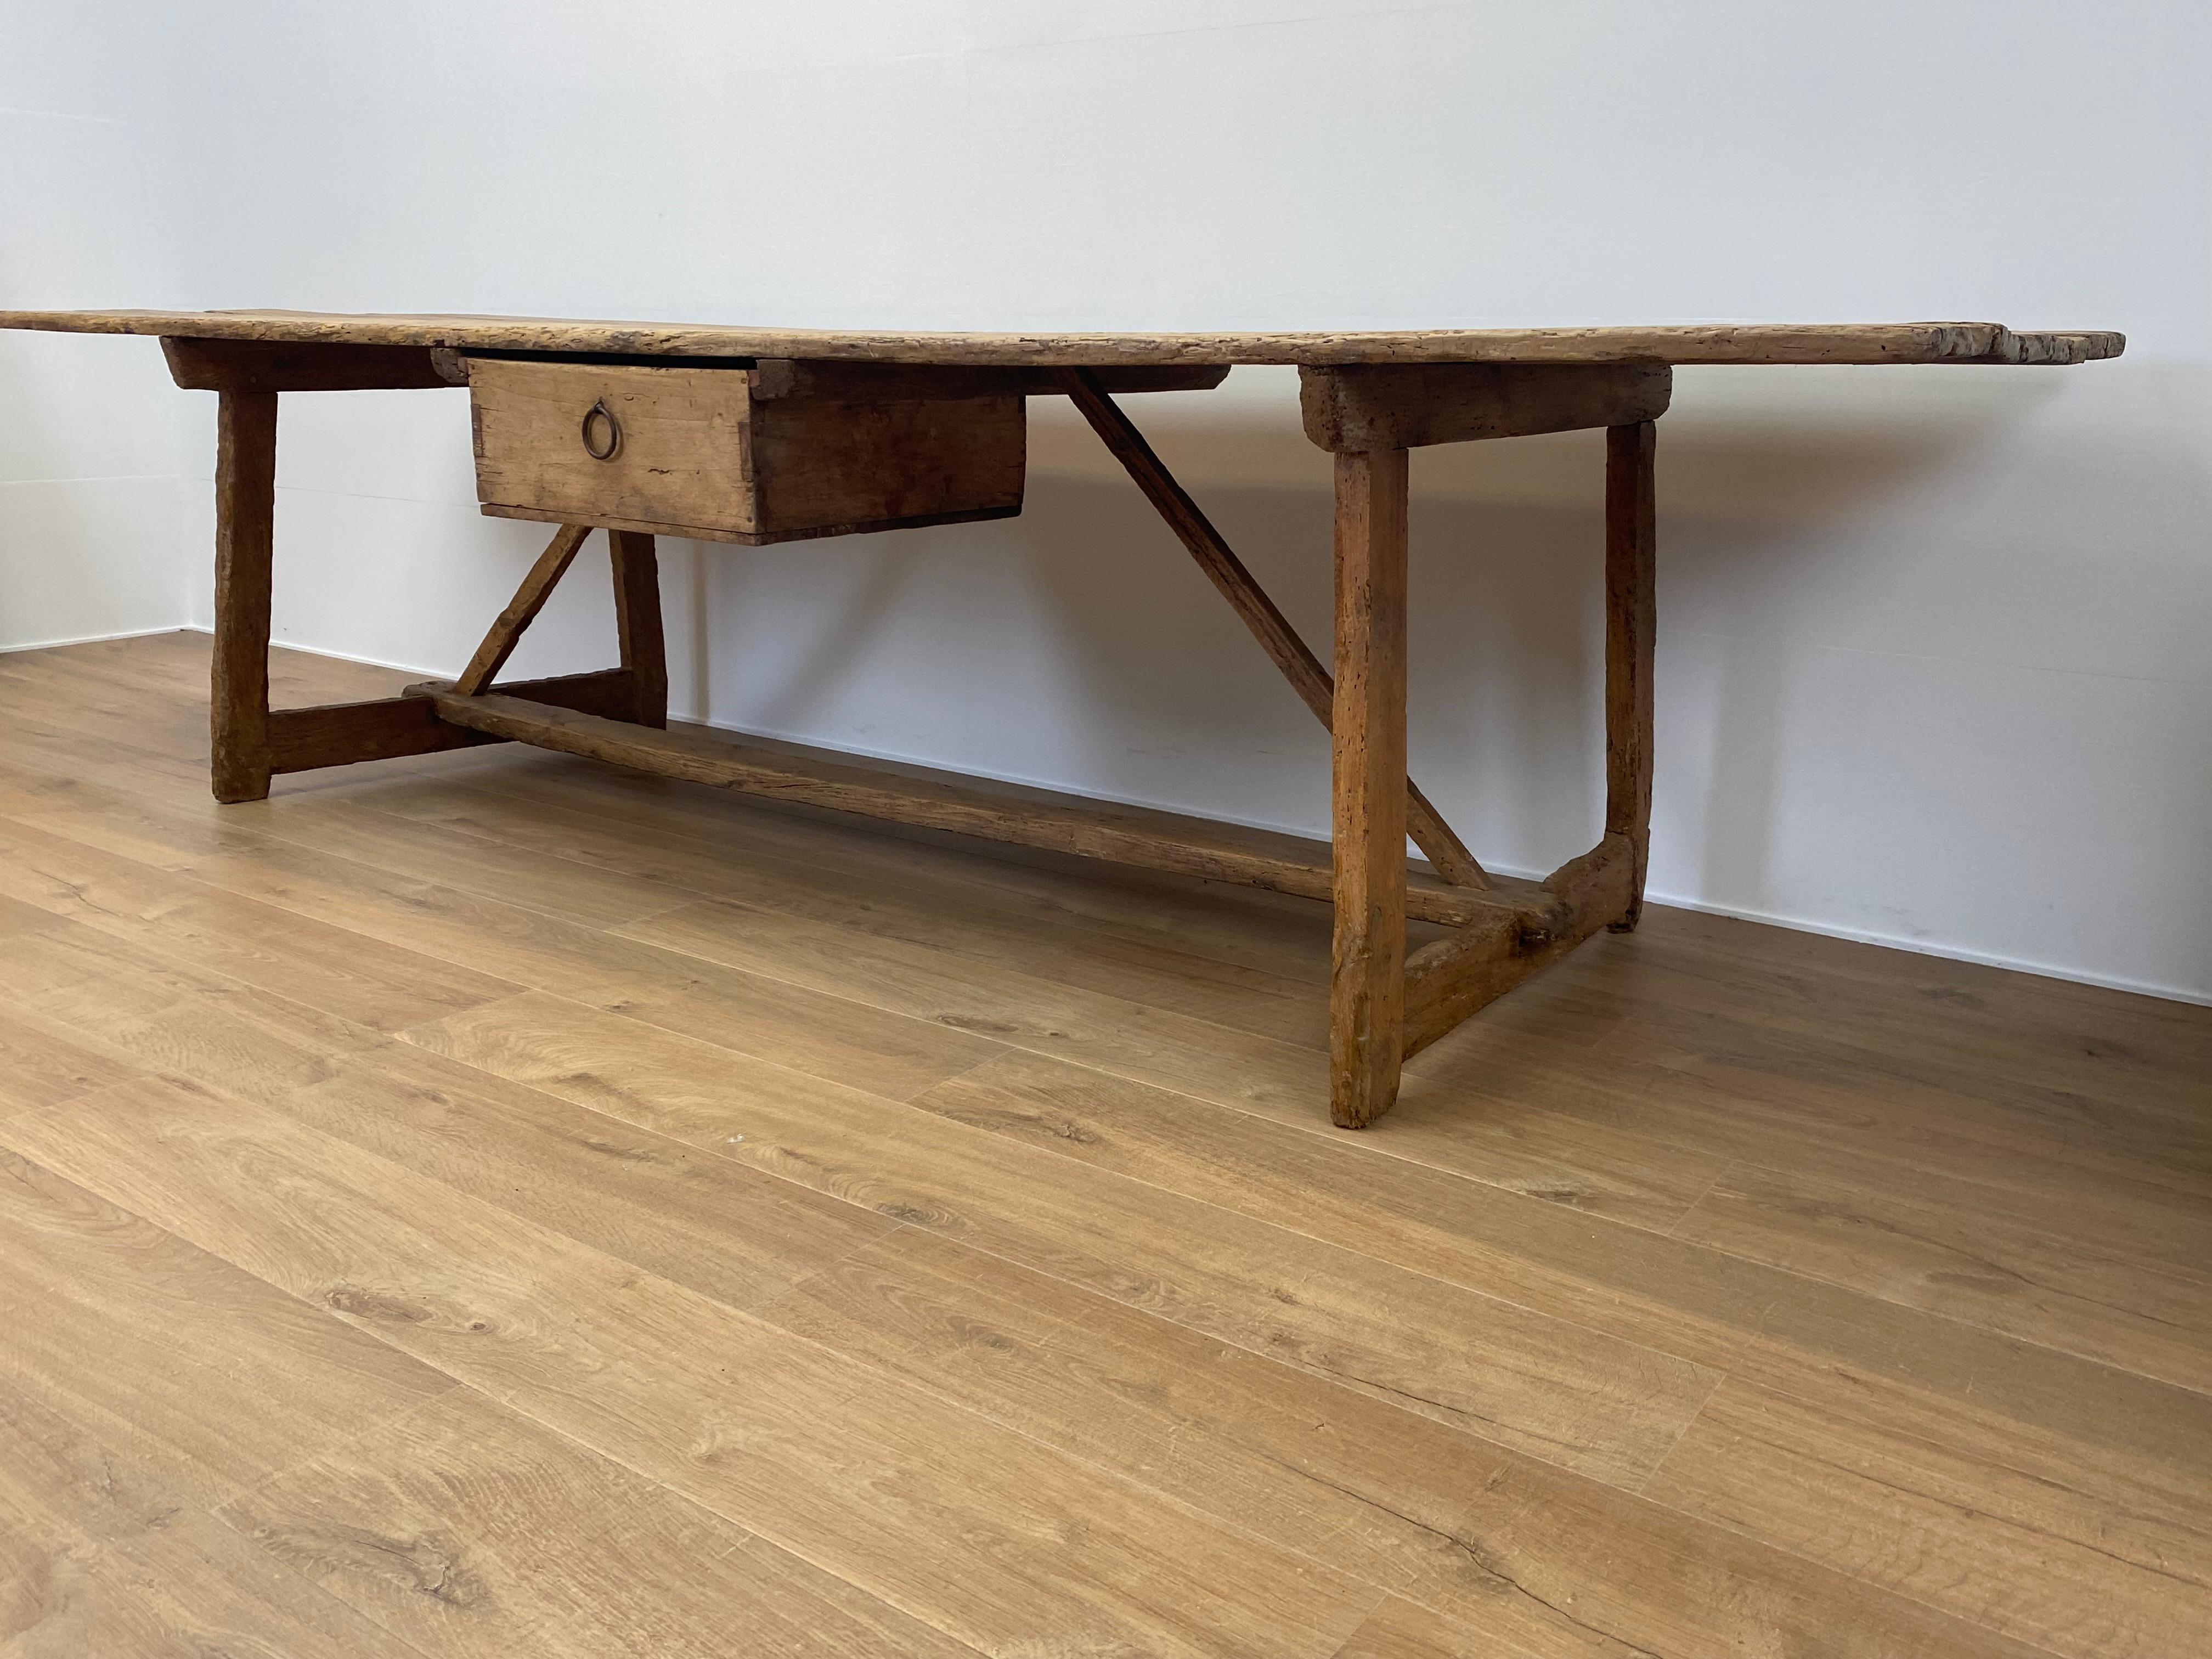 Brutalist, Rustic Spanish Farm Table In Good Condition For Sale In Schellebelle, BE